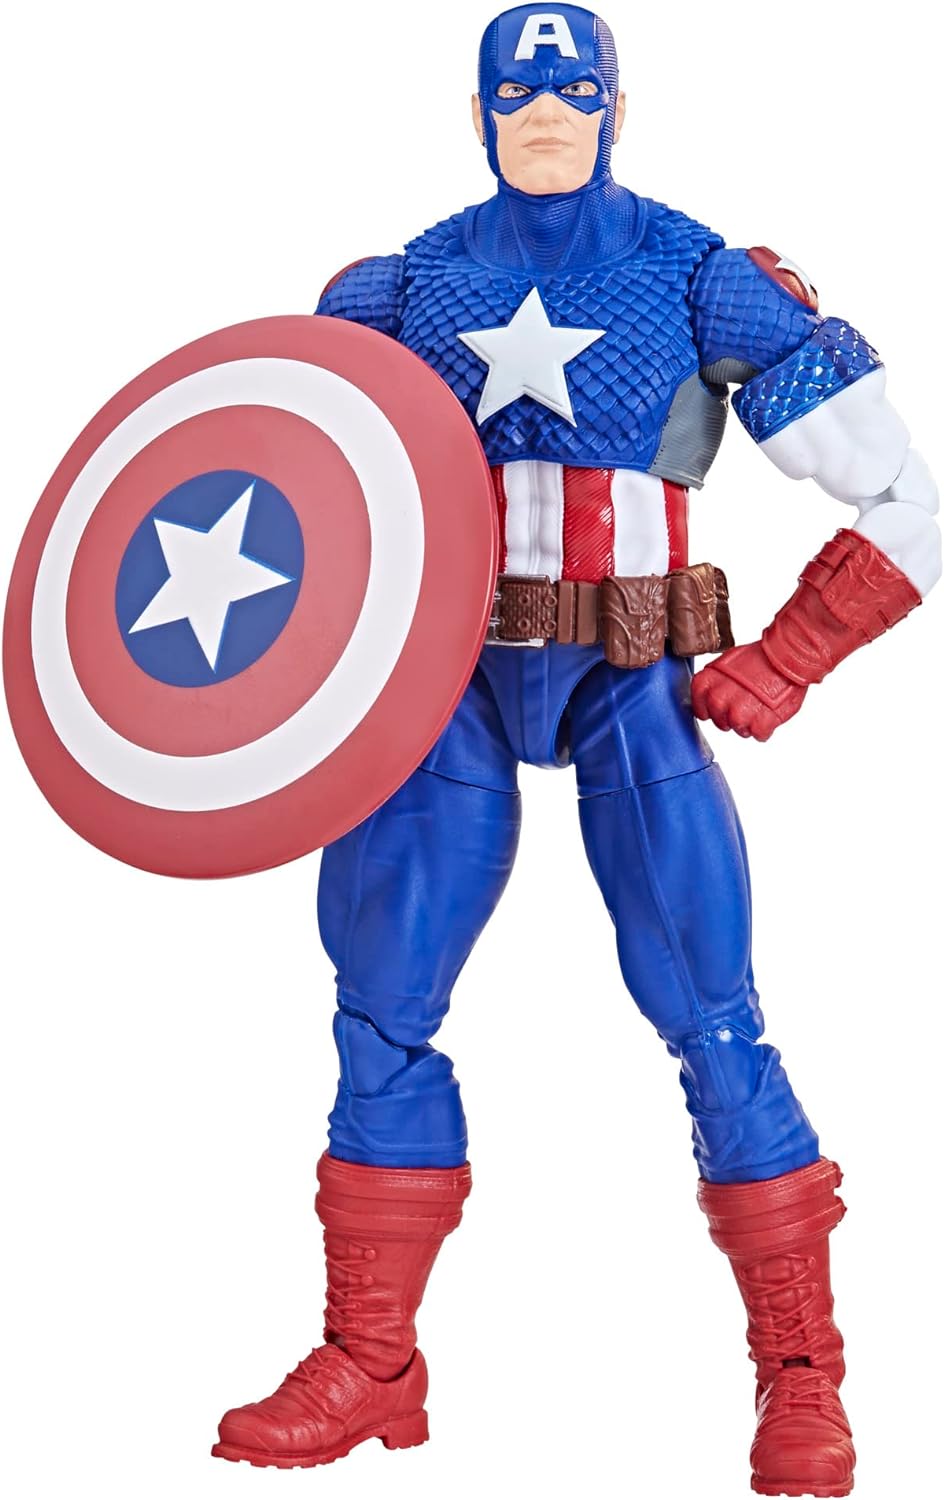 10 Inch Plush Stuffed Captain America Doll, From Avengers, Good Condition -   Norway